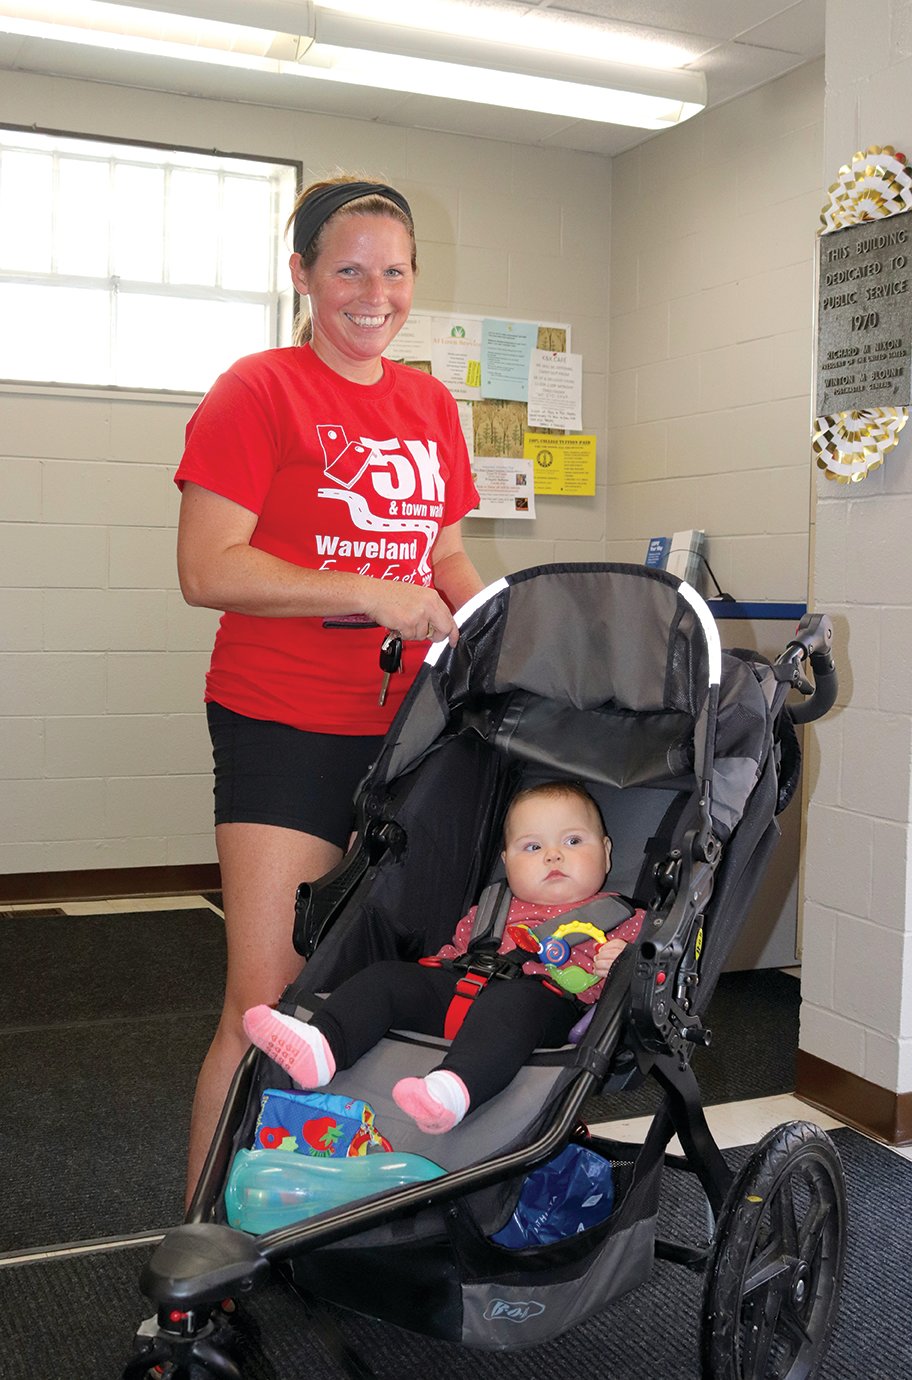 Wingate resident Mindy Nichols and her seven-month-old daughter Madison visit the Wingate Post Office Thursday. Members of the Nichols family and many others make routine stops at the post office, sometimes simply to see Postmaster Jennifred Jones and others in the community.